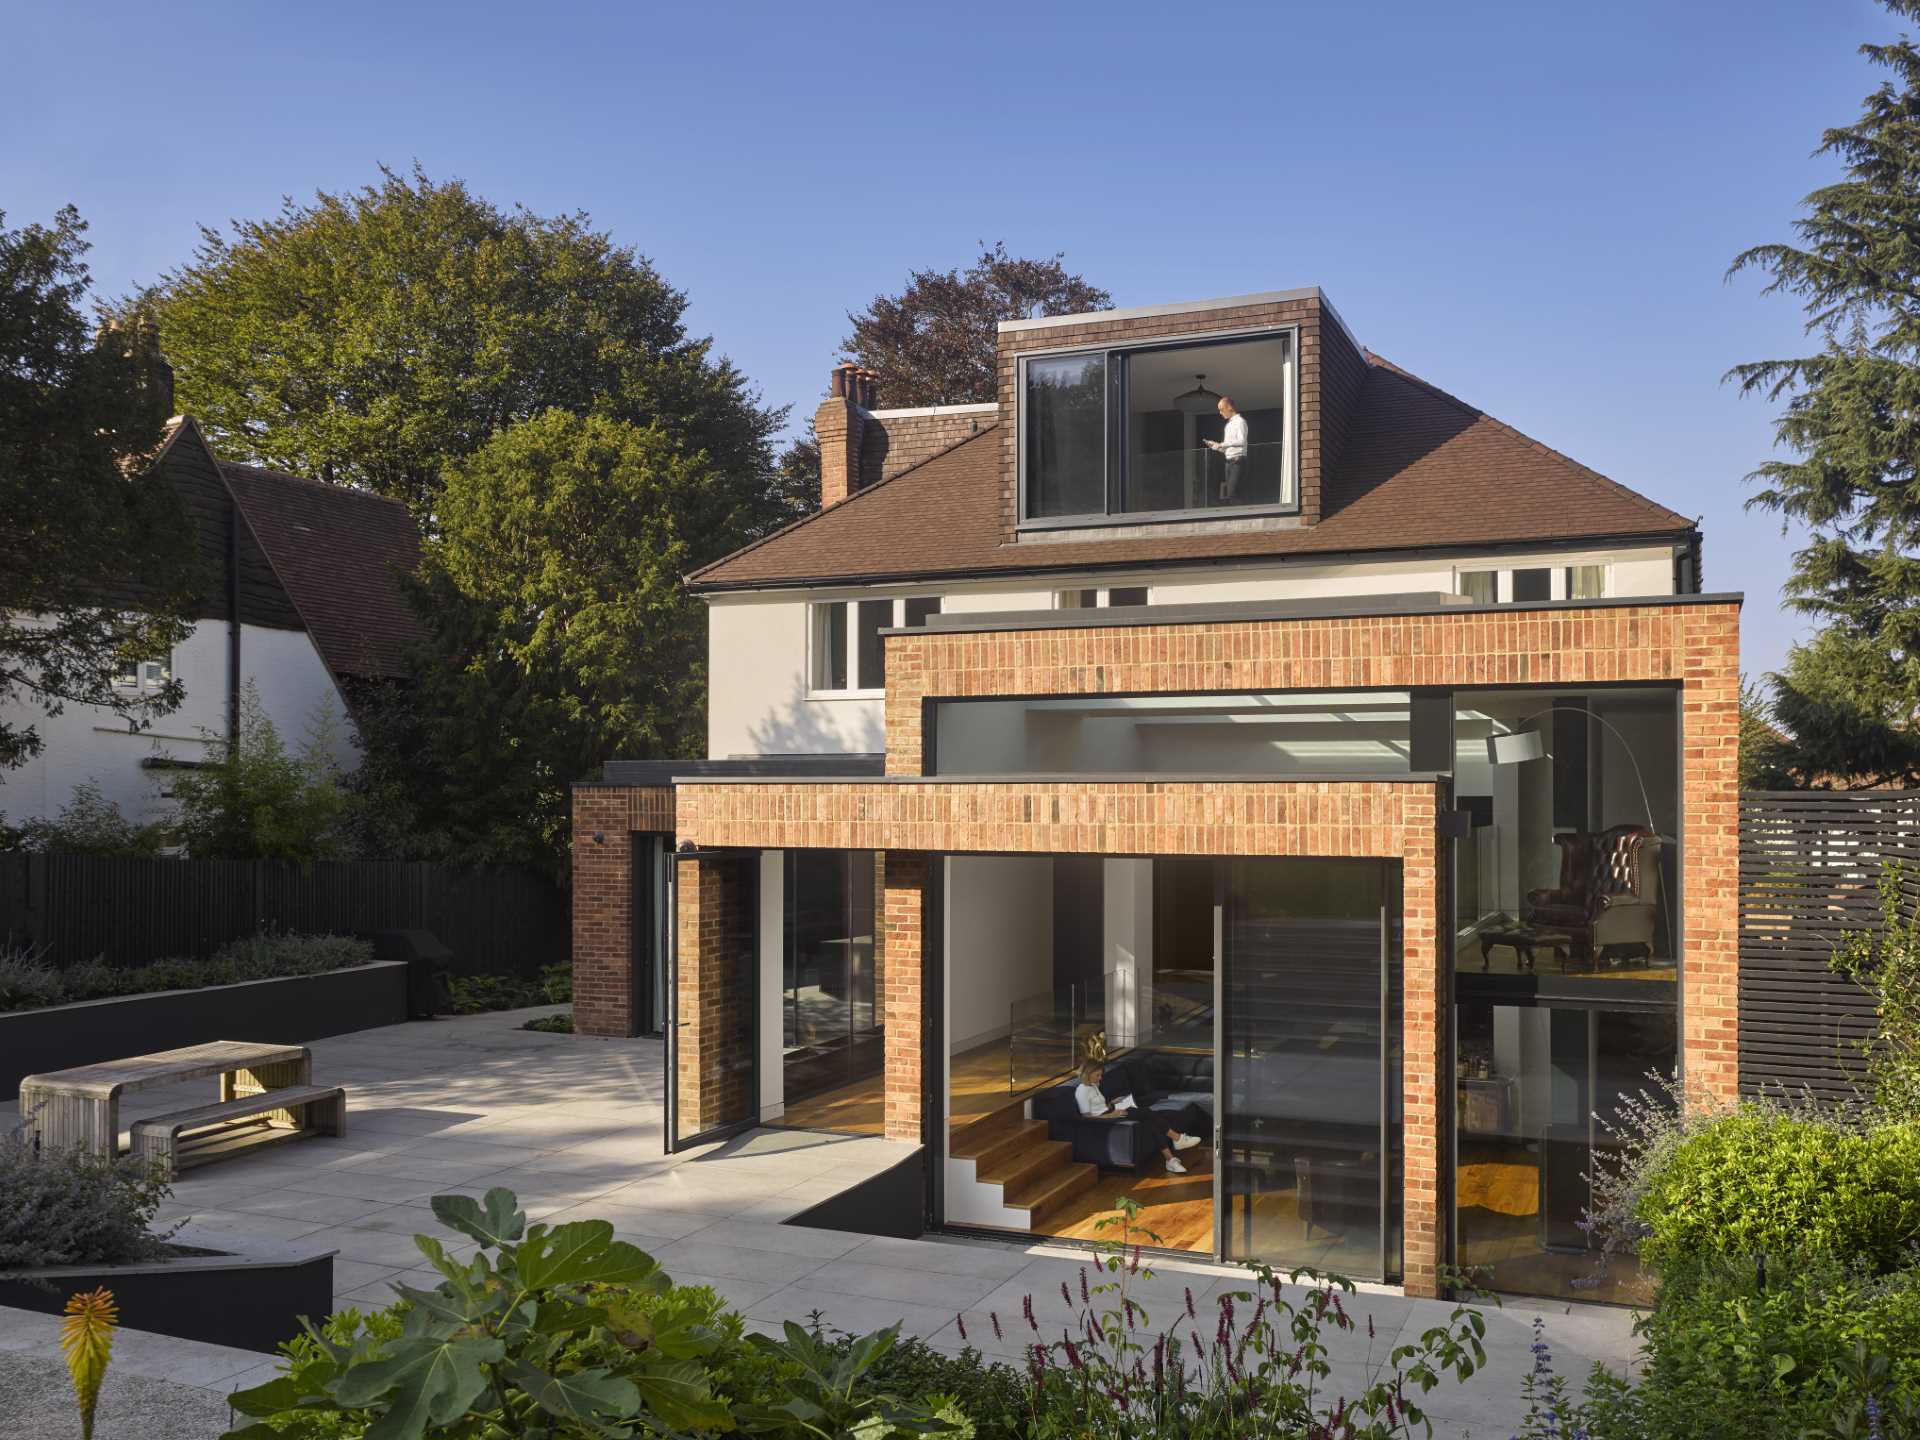 A 1920s British home received a modern rear addition with a sunken living room.